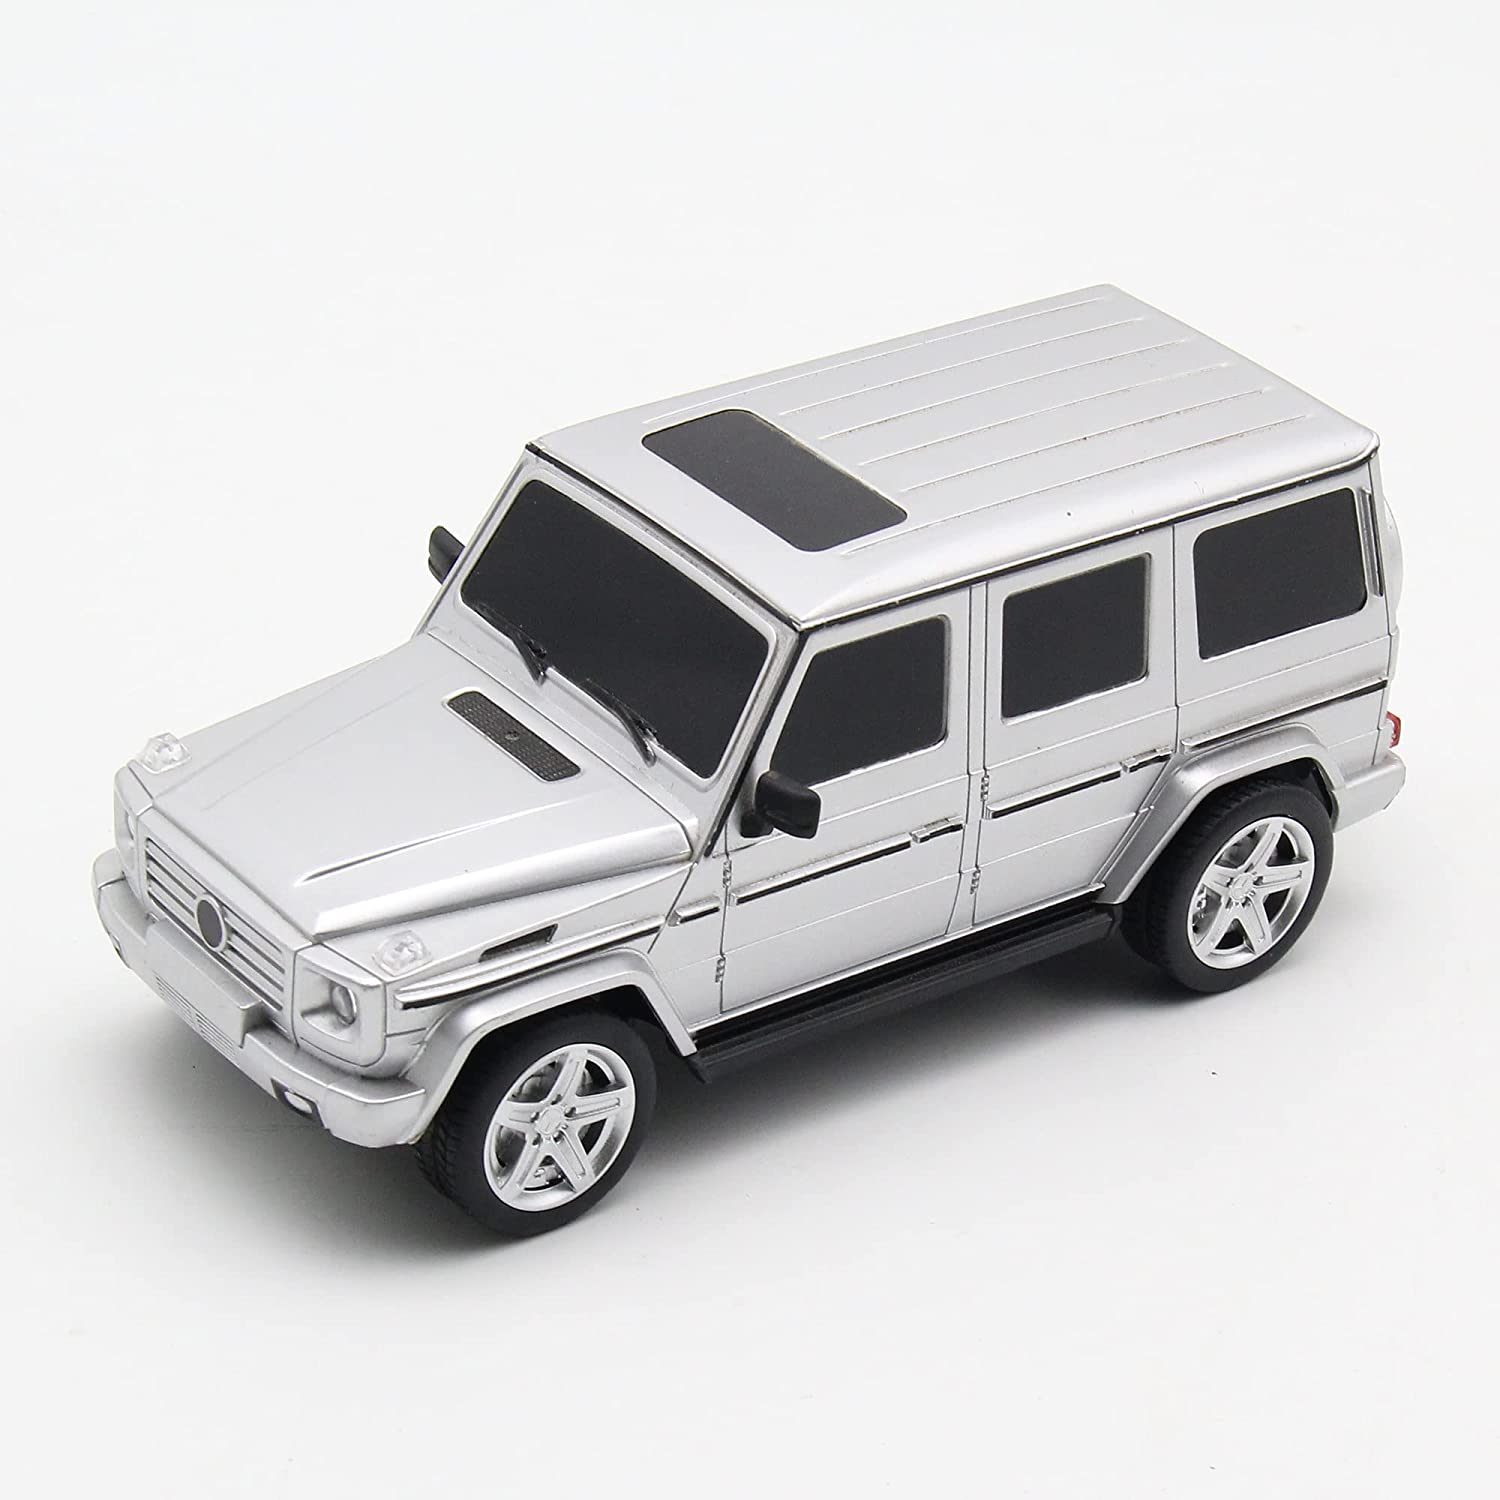 Playzu R/C 1:24 Scale SUV Vehicle, Silver - Remote Control Car for Kids Ages 6+